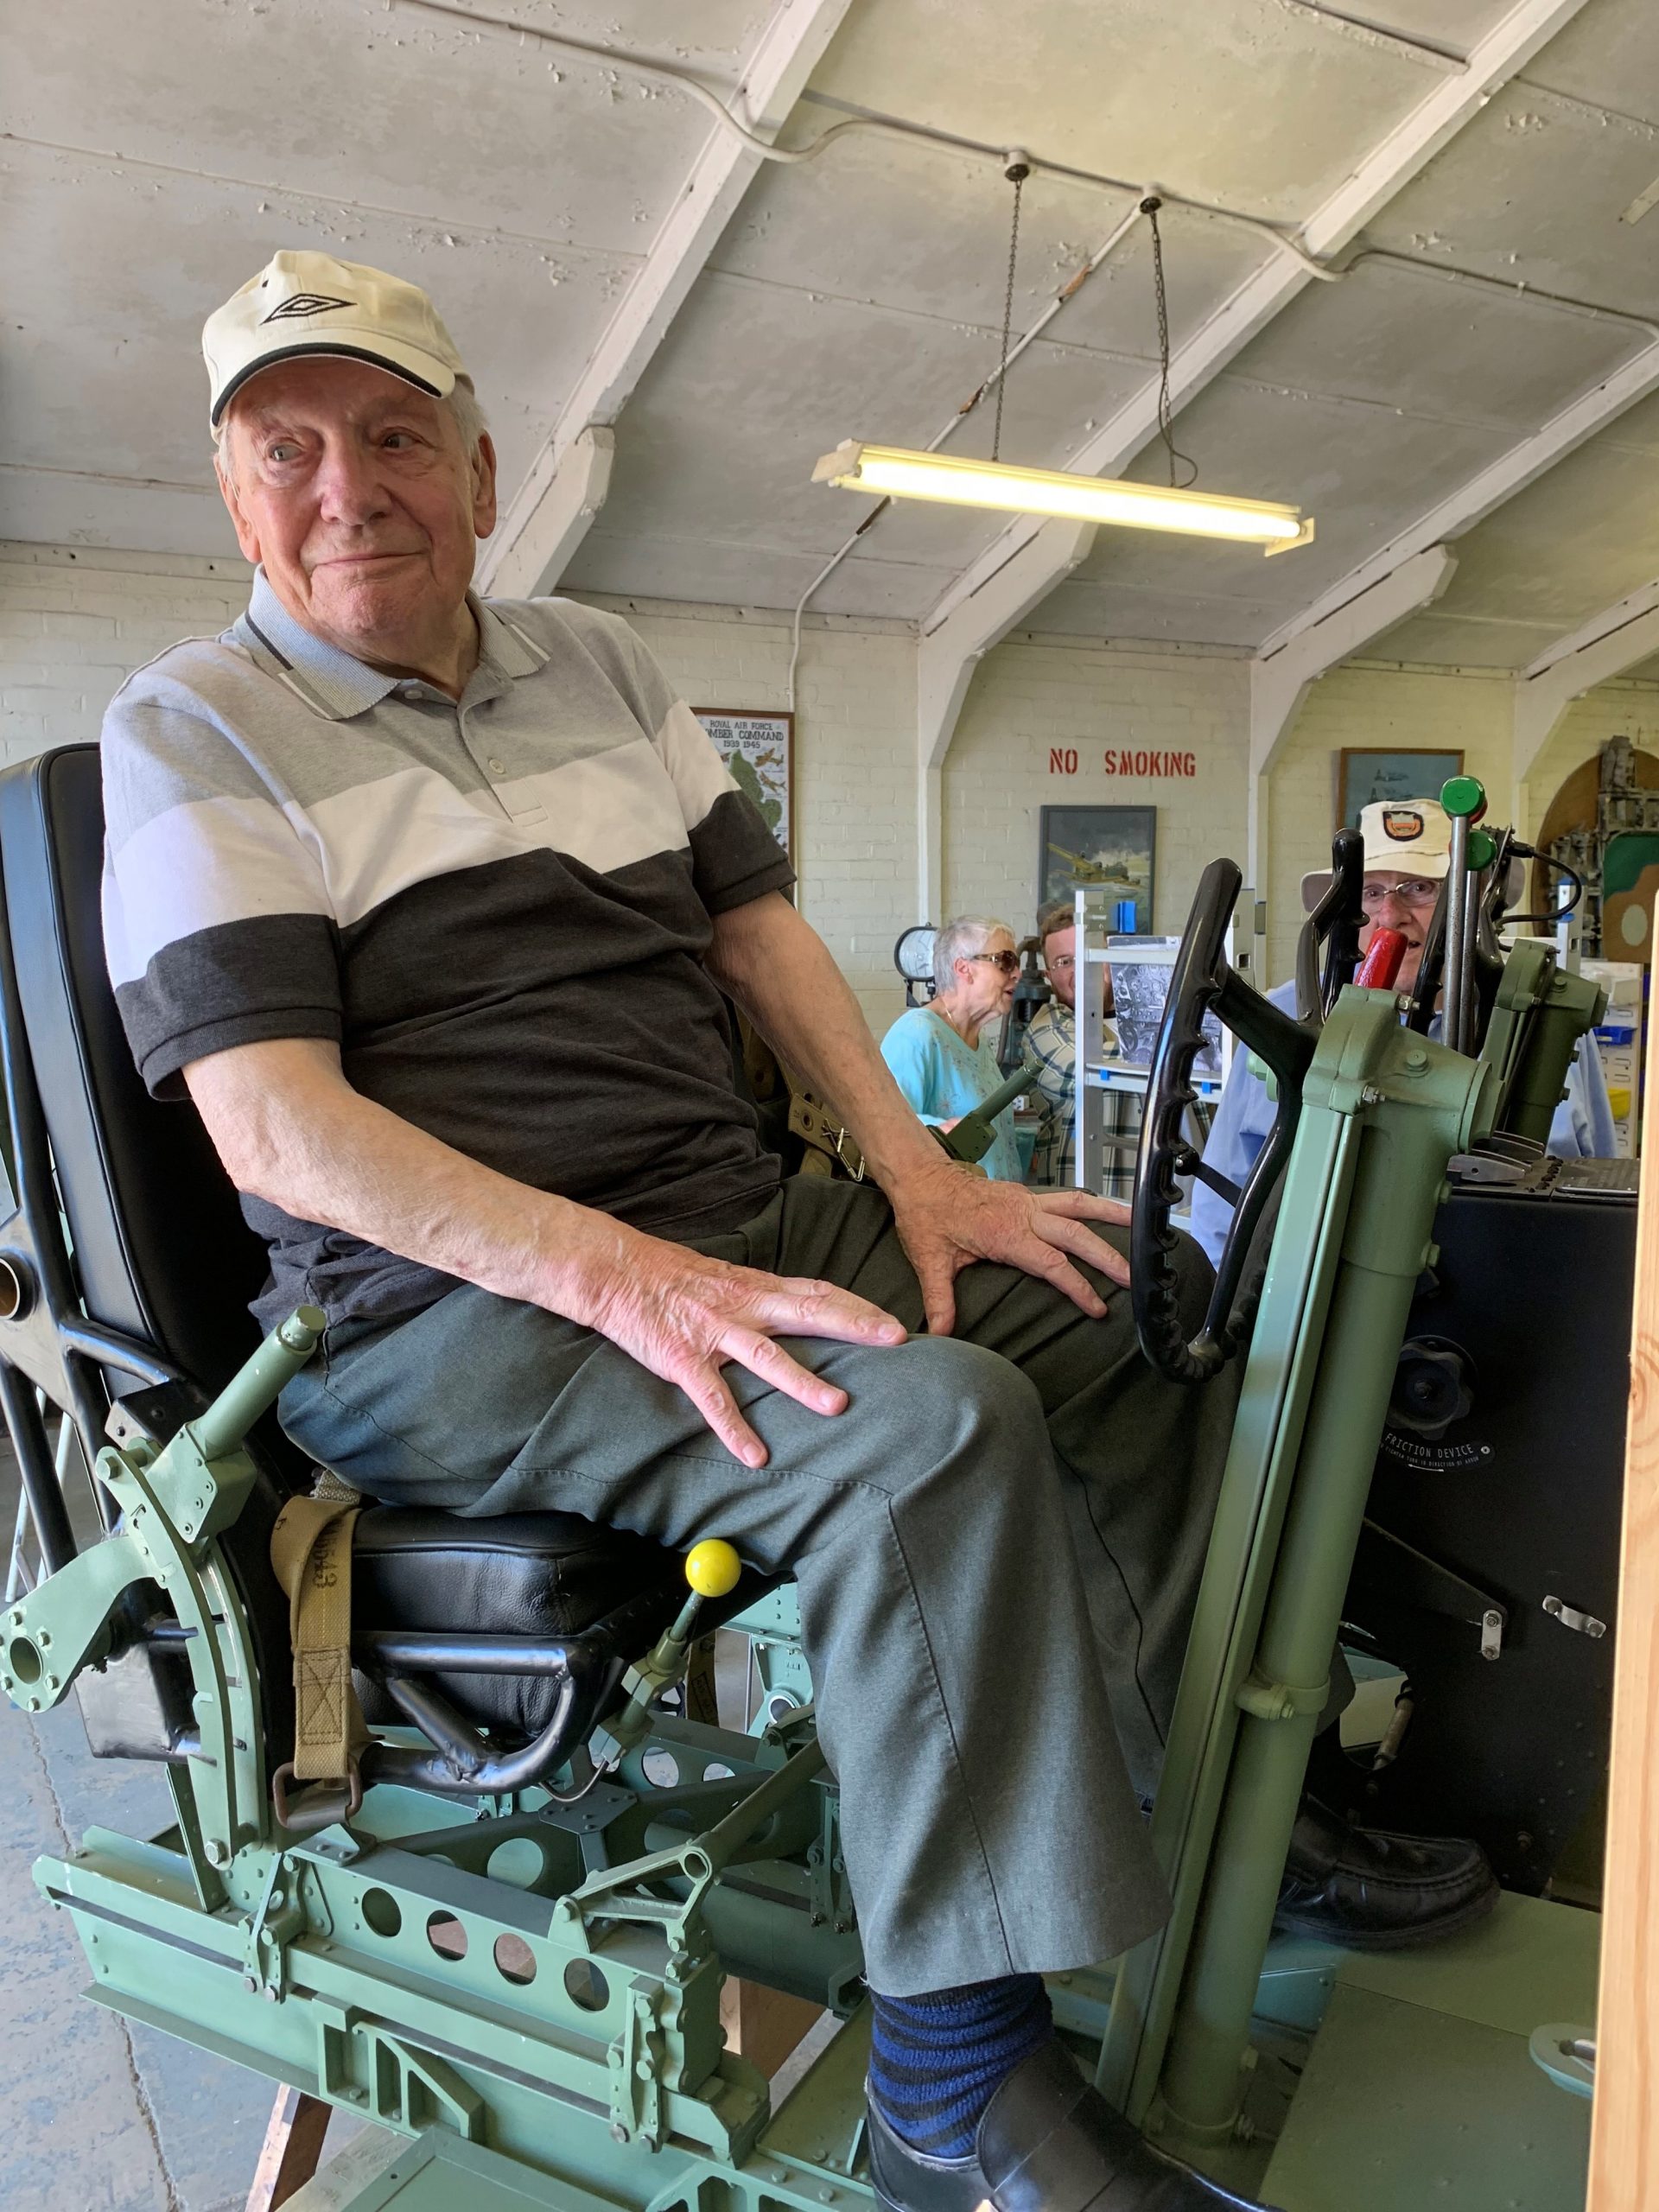 75 Years On – Armed Forces Charity Unites Veteran With A Short Stirling Bomber